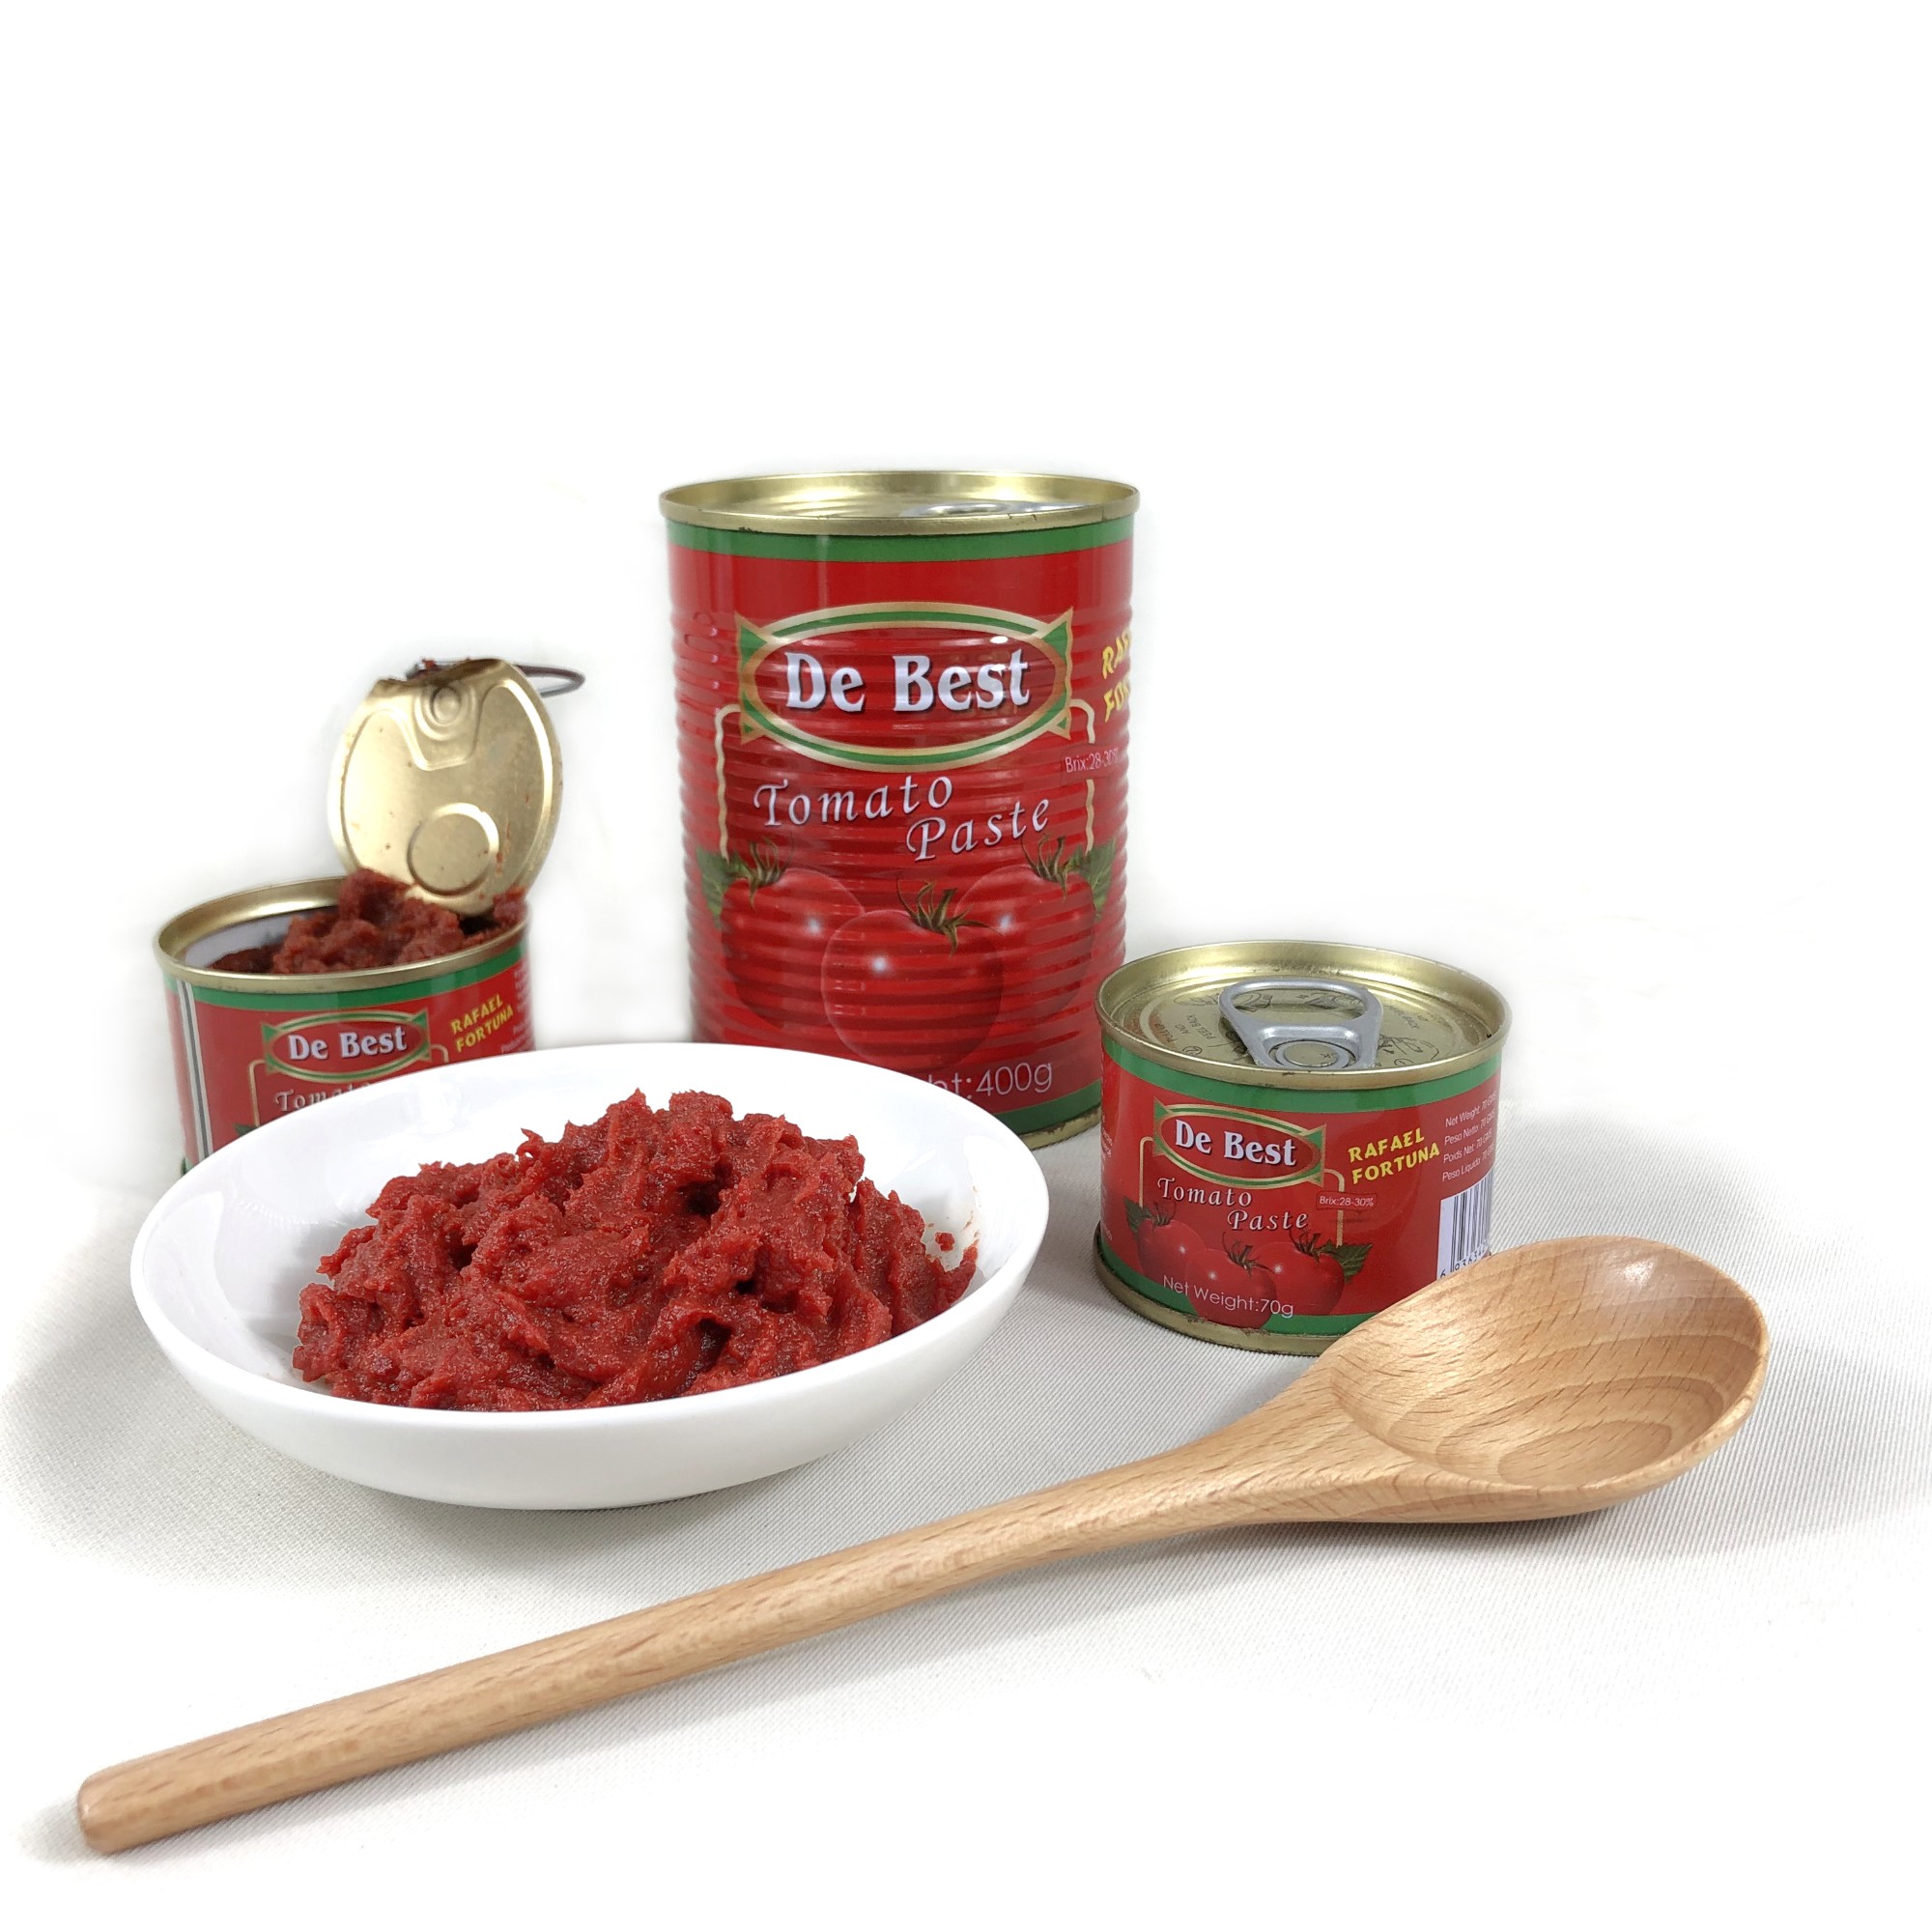 Canned tomato paste 400g 